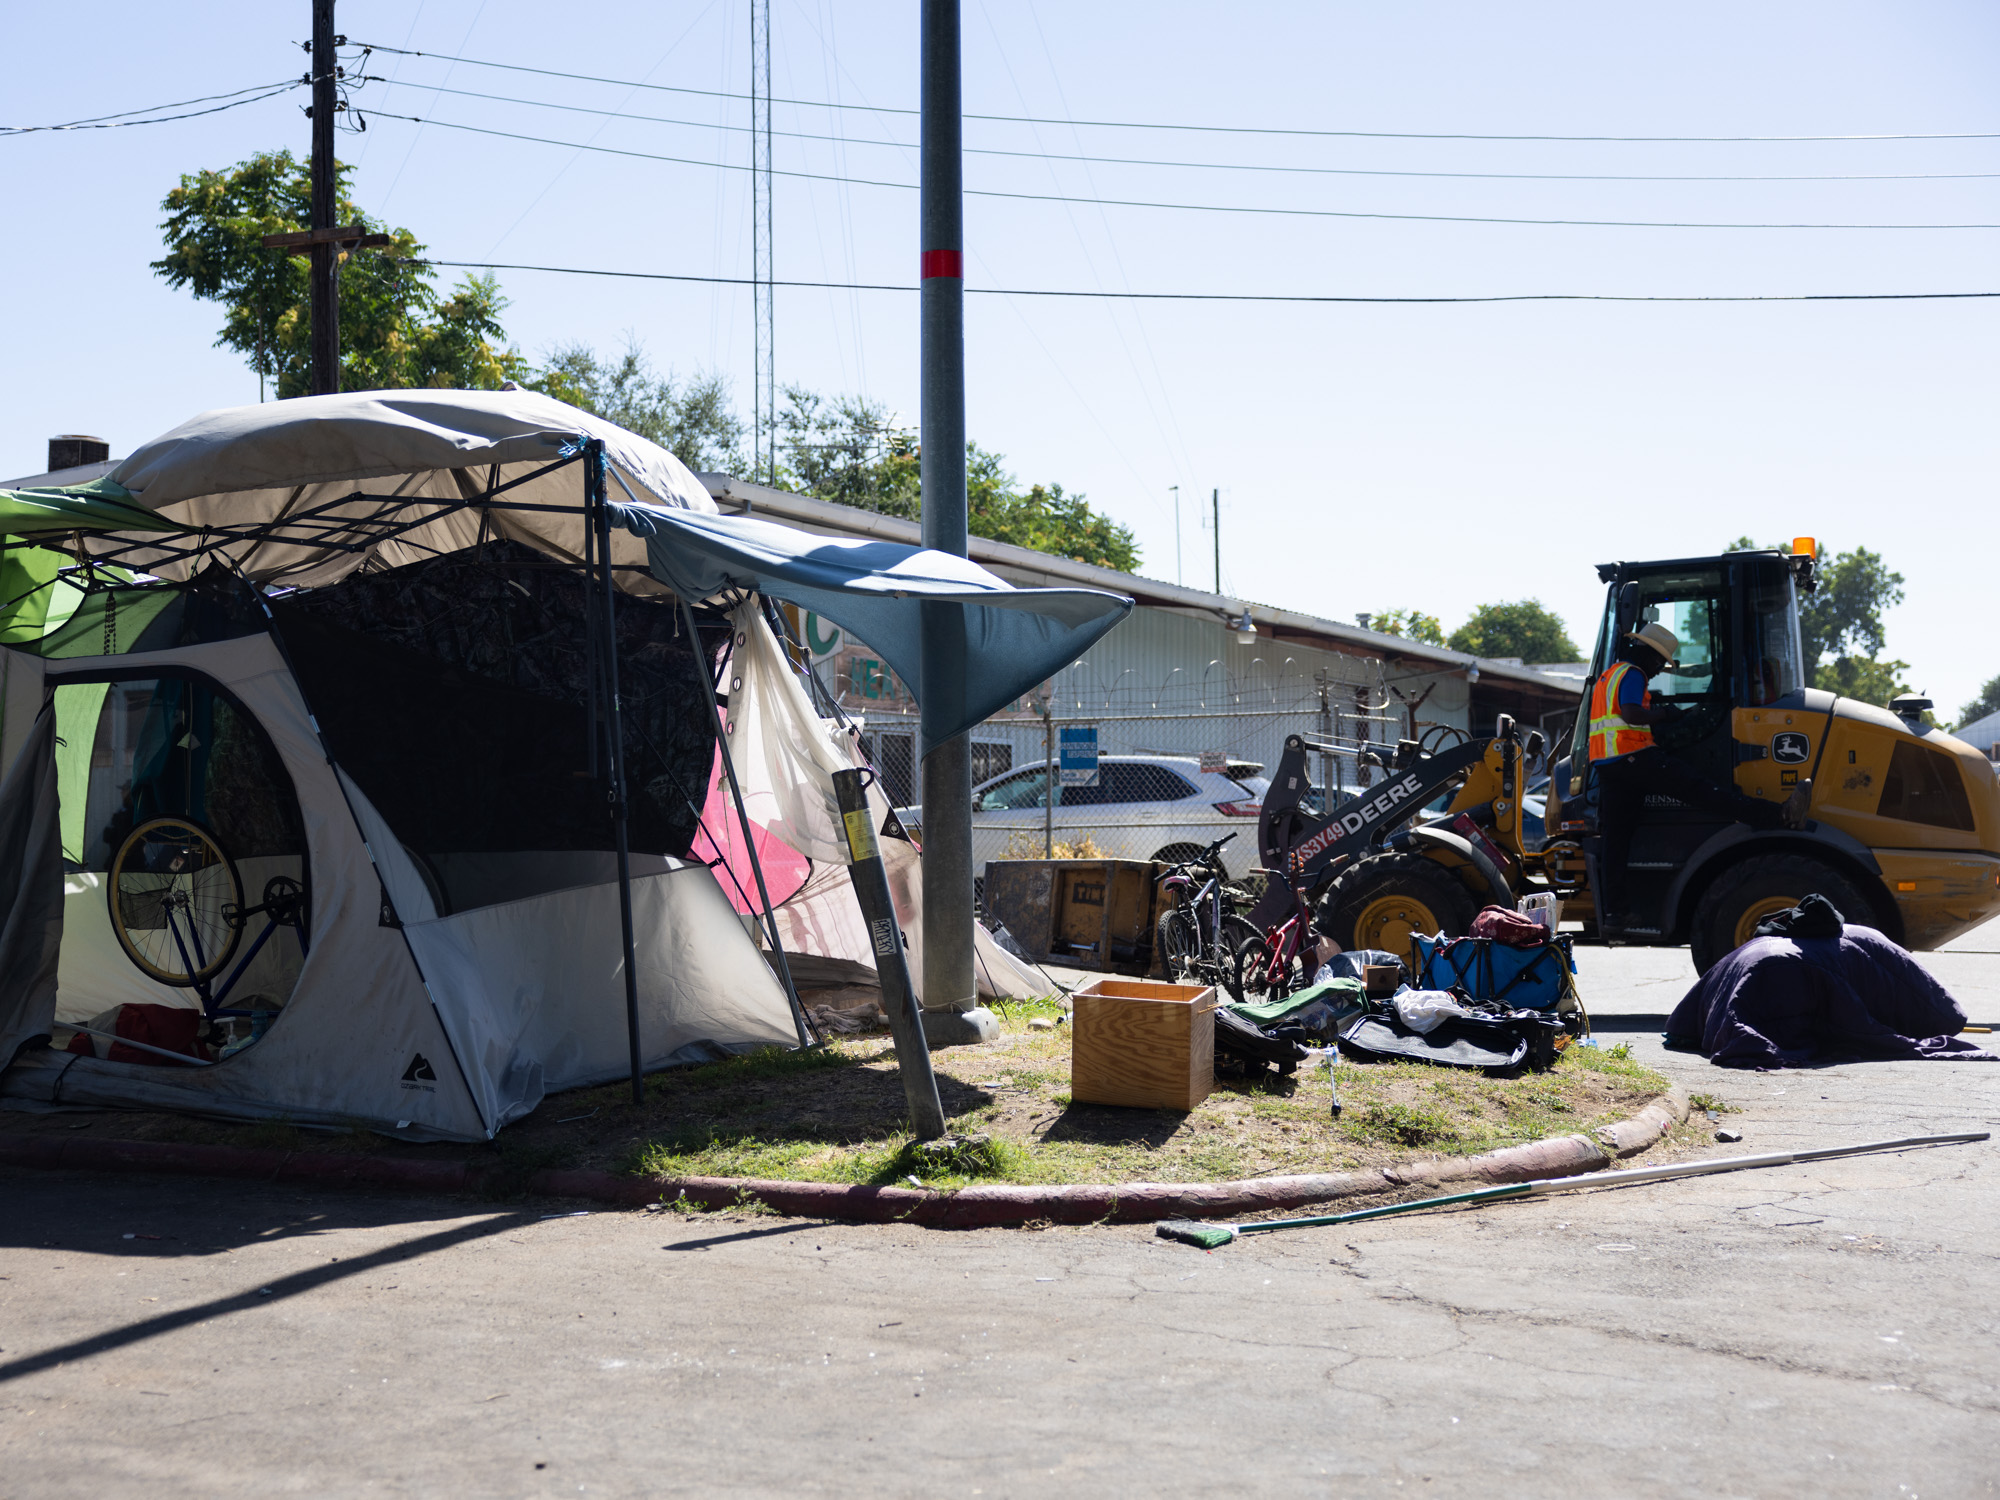 Why the Sac County DA is Threatening to Sue the City Over Homeless Encampments Researching Poor Air Quality and Health in Sacramento Neighborhoods pic